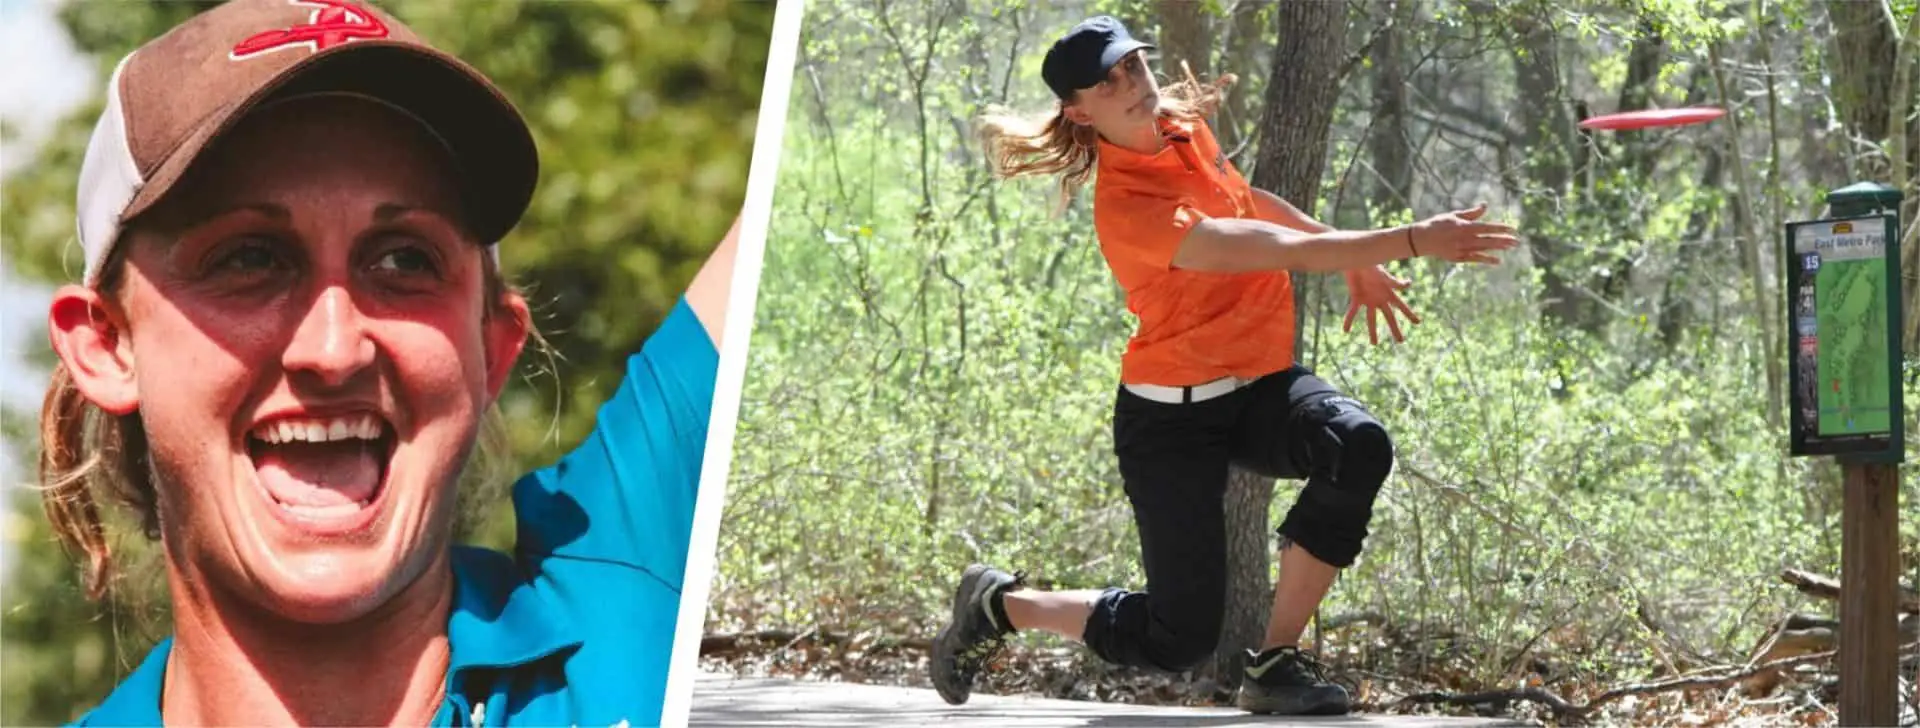 The Top 7 Women in Disc Golf Biographies, Favorite Discs and More